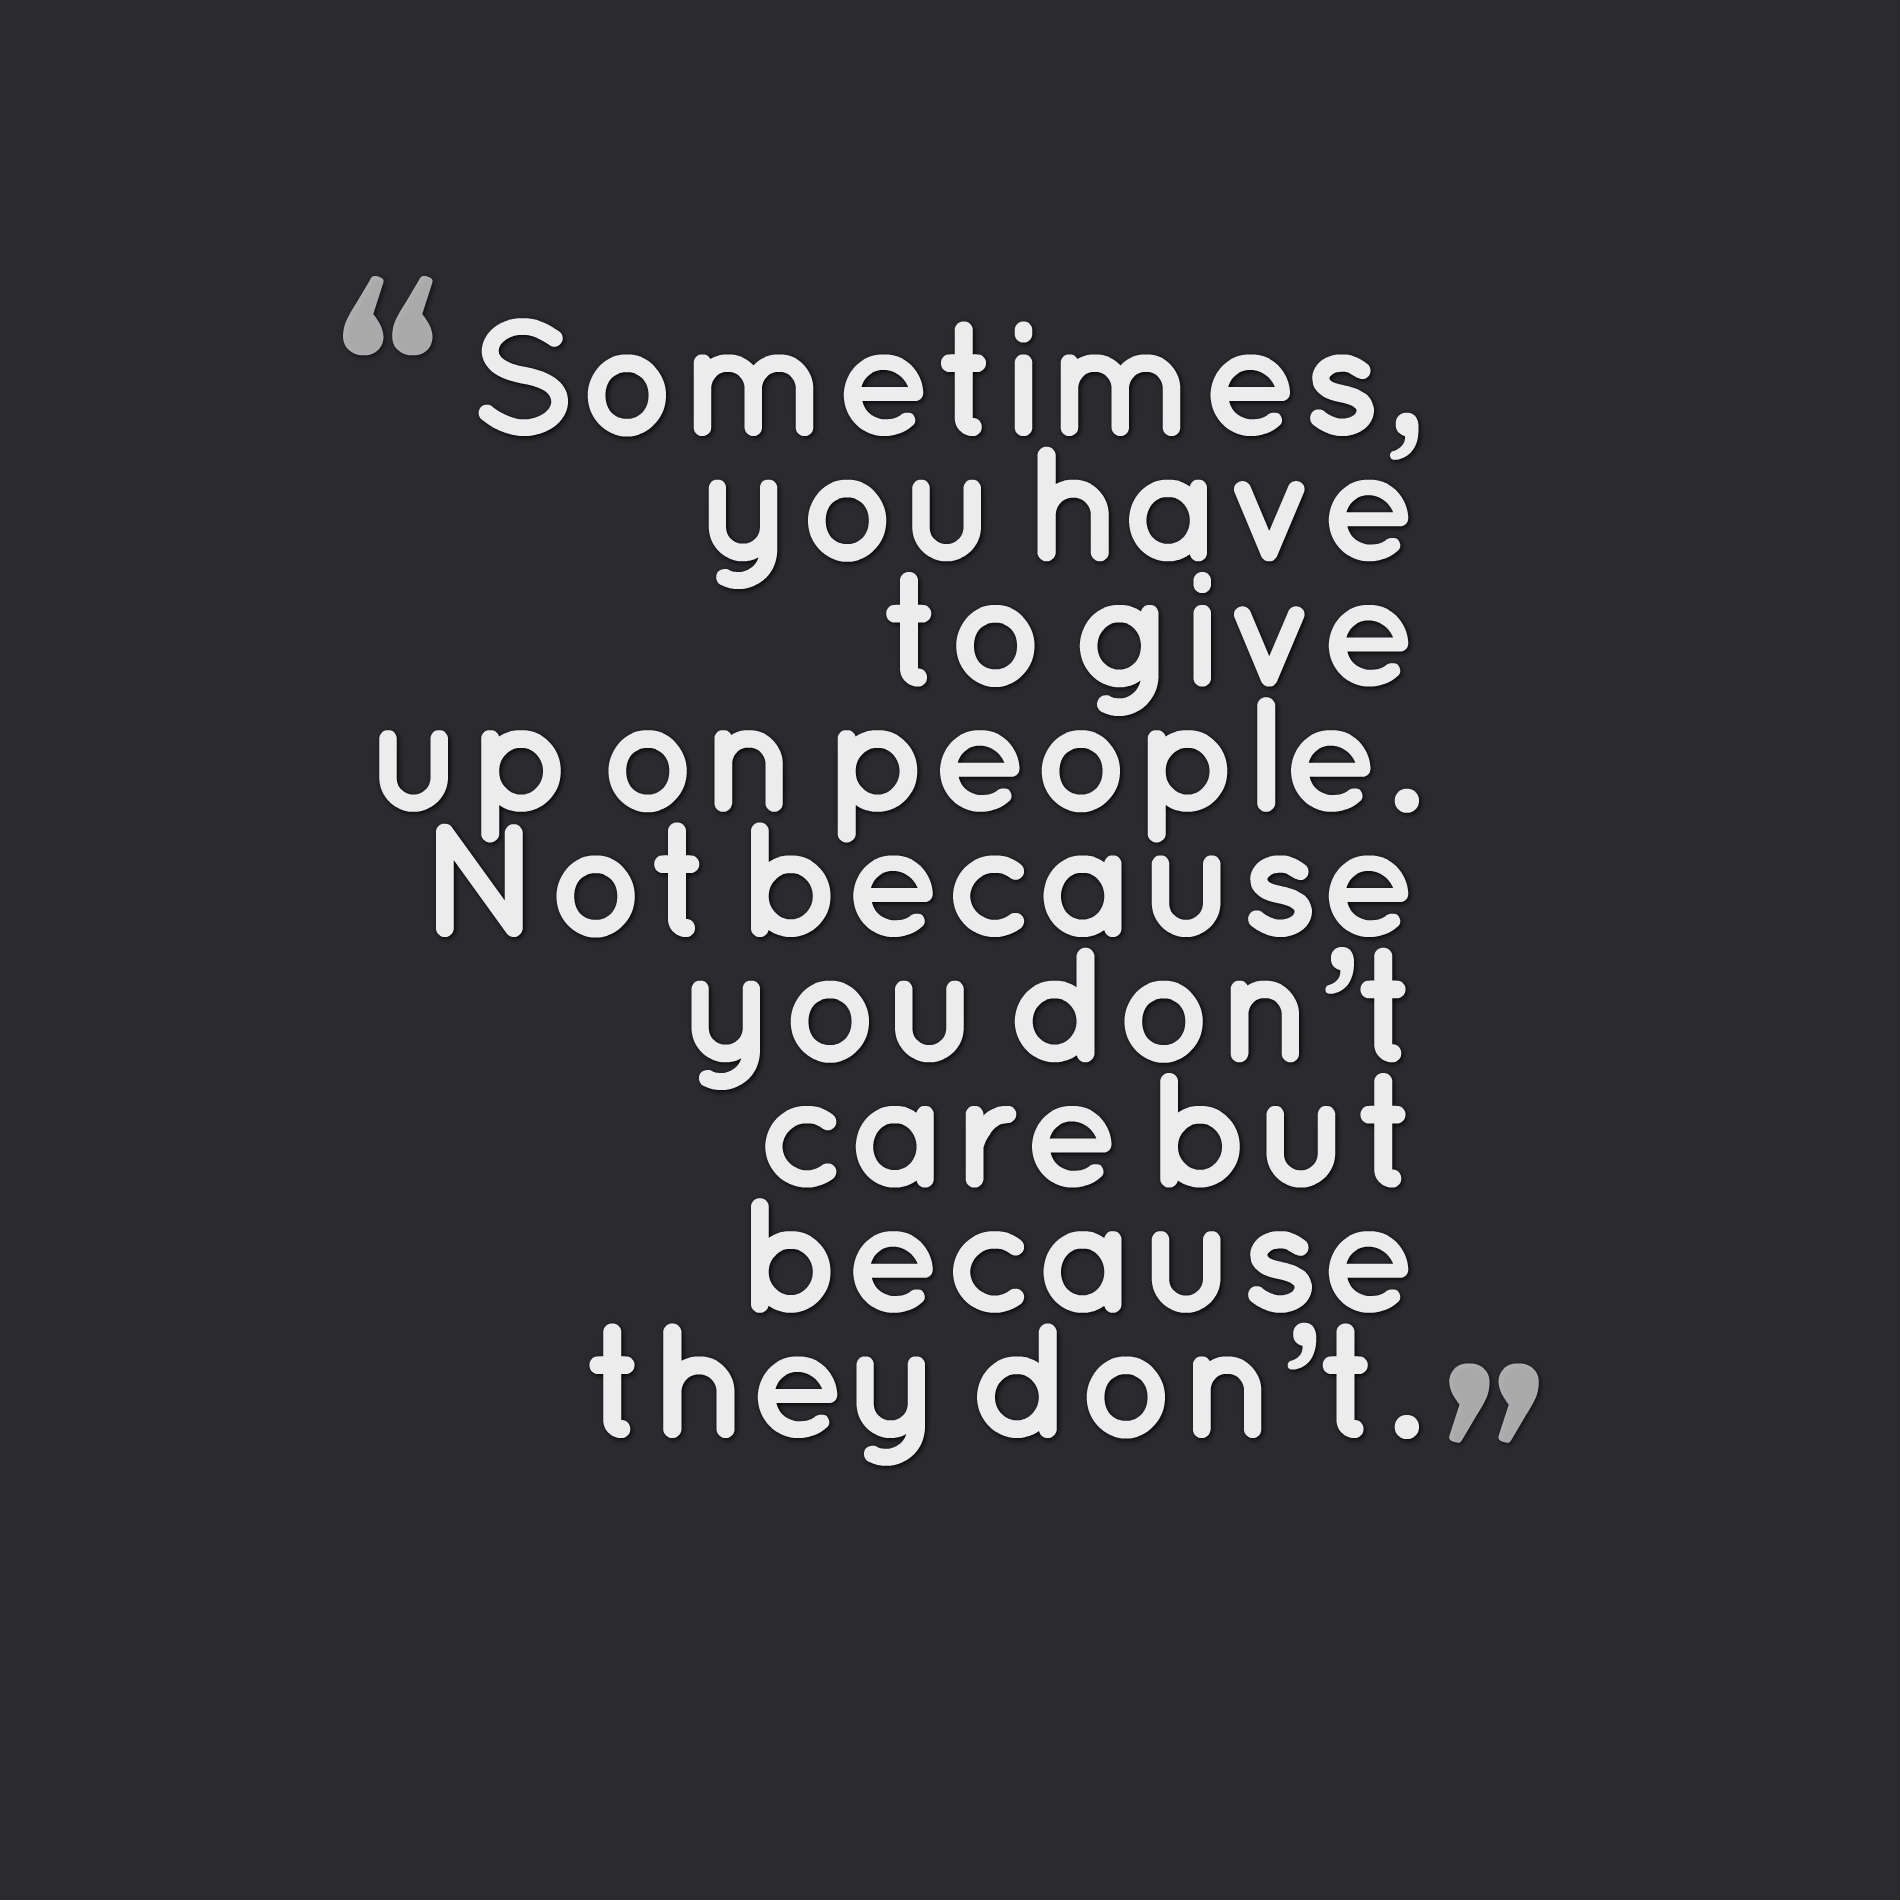 Sometimes, you have to give up on people. Not because you don’t care but because they don’t